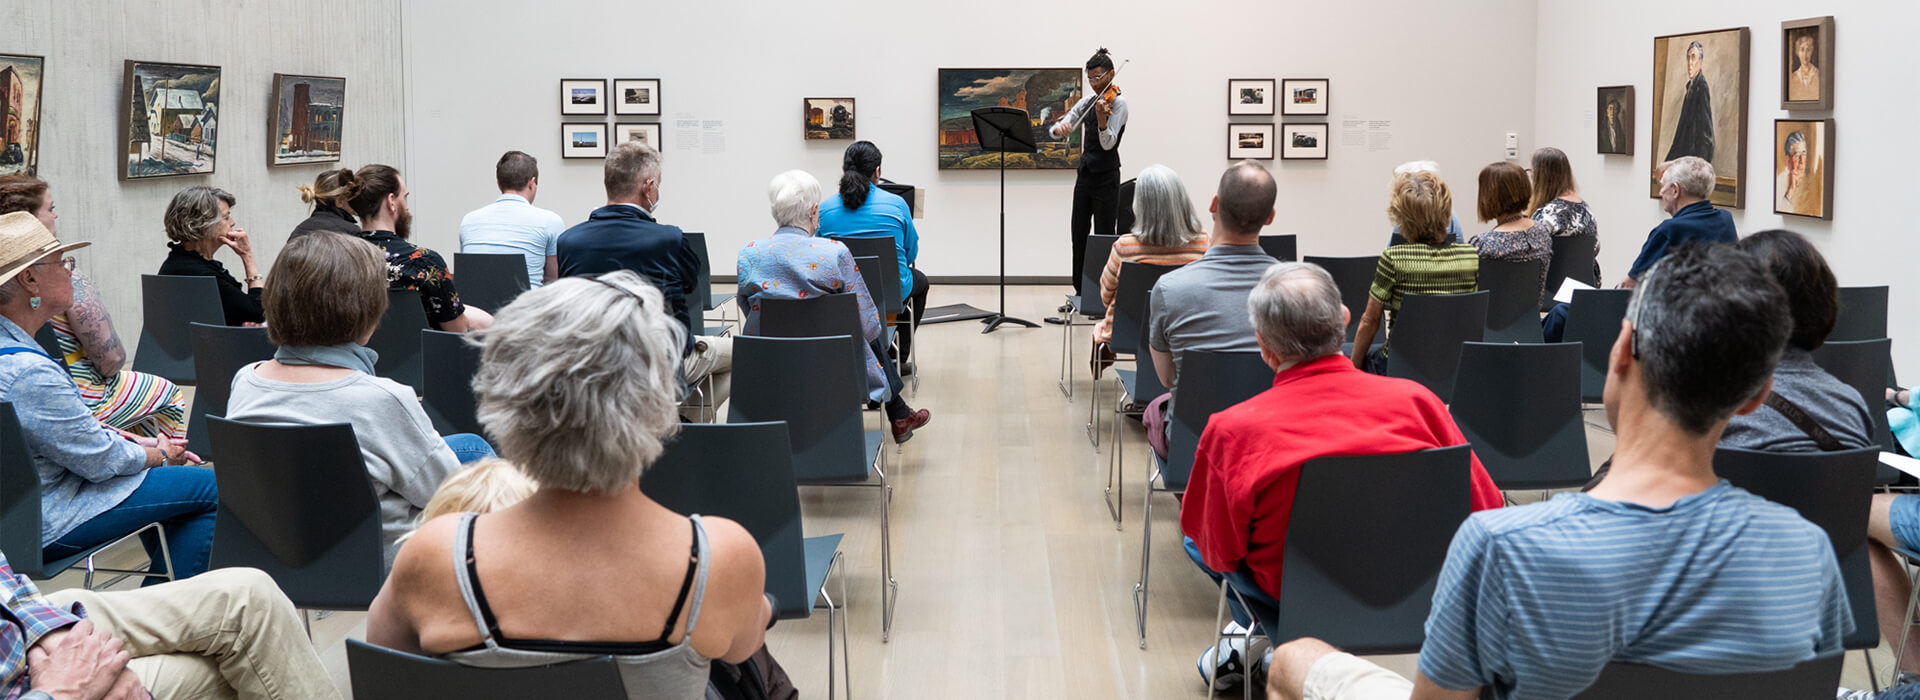 People sit and listen to chamber music in an art gallery